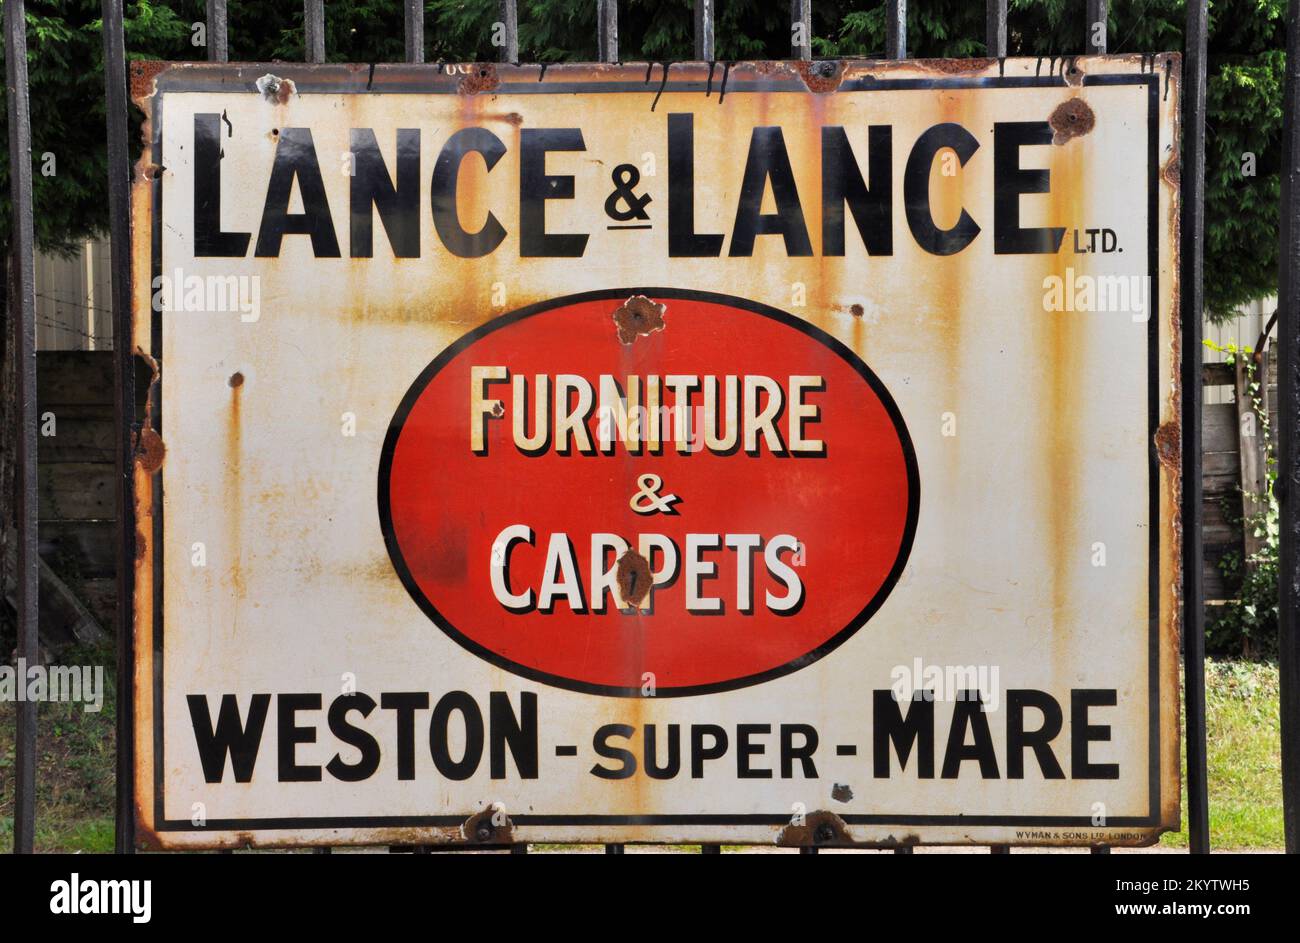 Enamelled metal sign, advertising Lance & Lance Furniture & Carpets photographed at Bishops Lydeard station on the West Somerset railway in Somerset,E Stock Photo